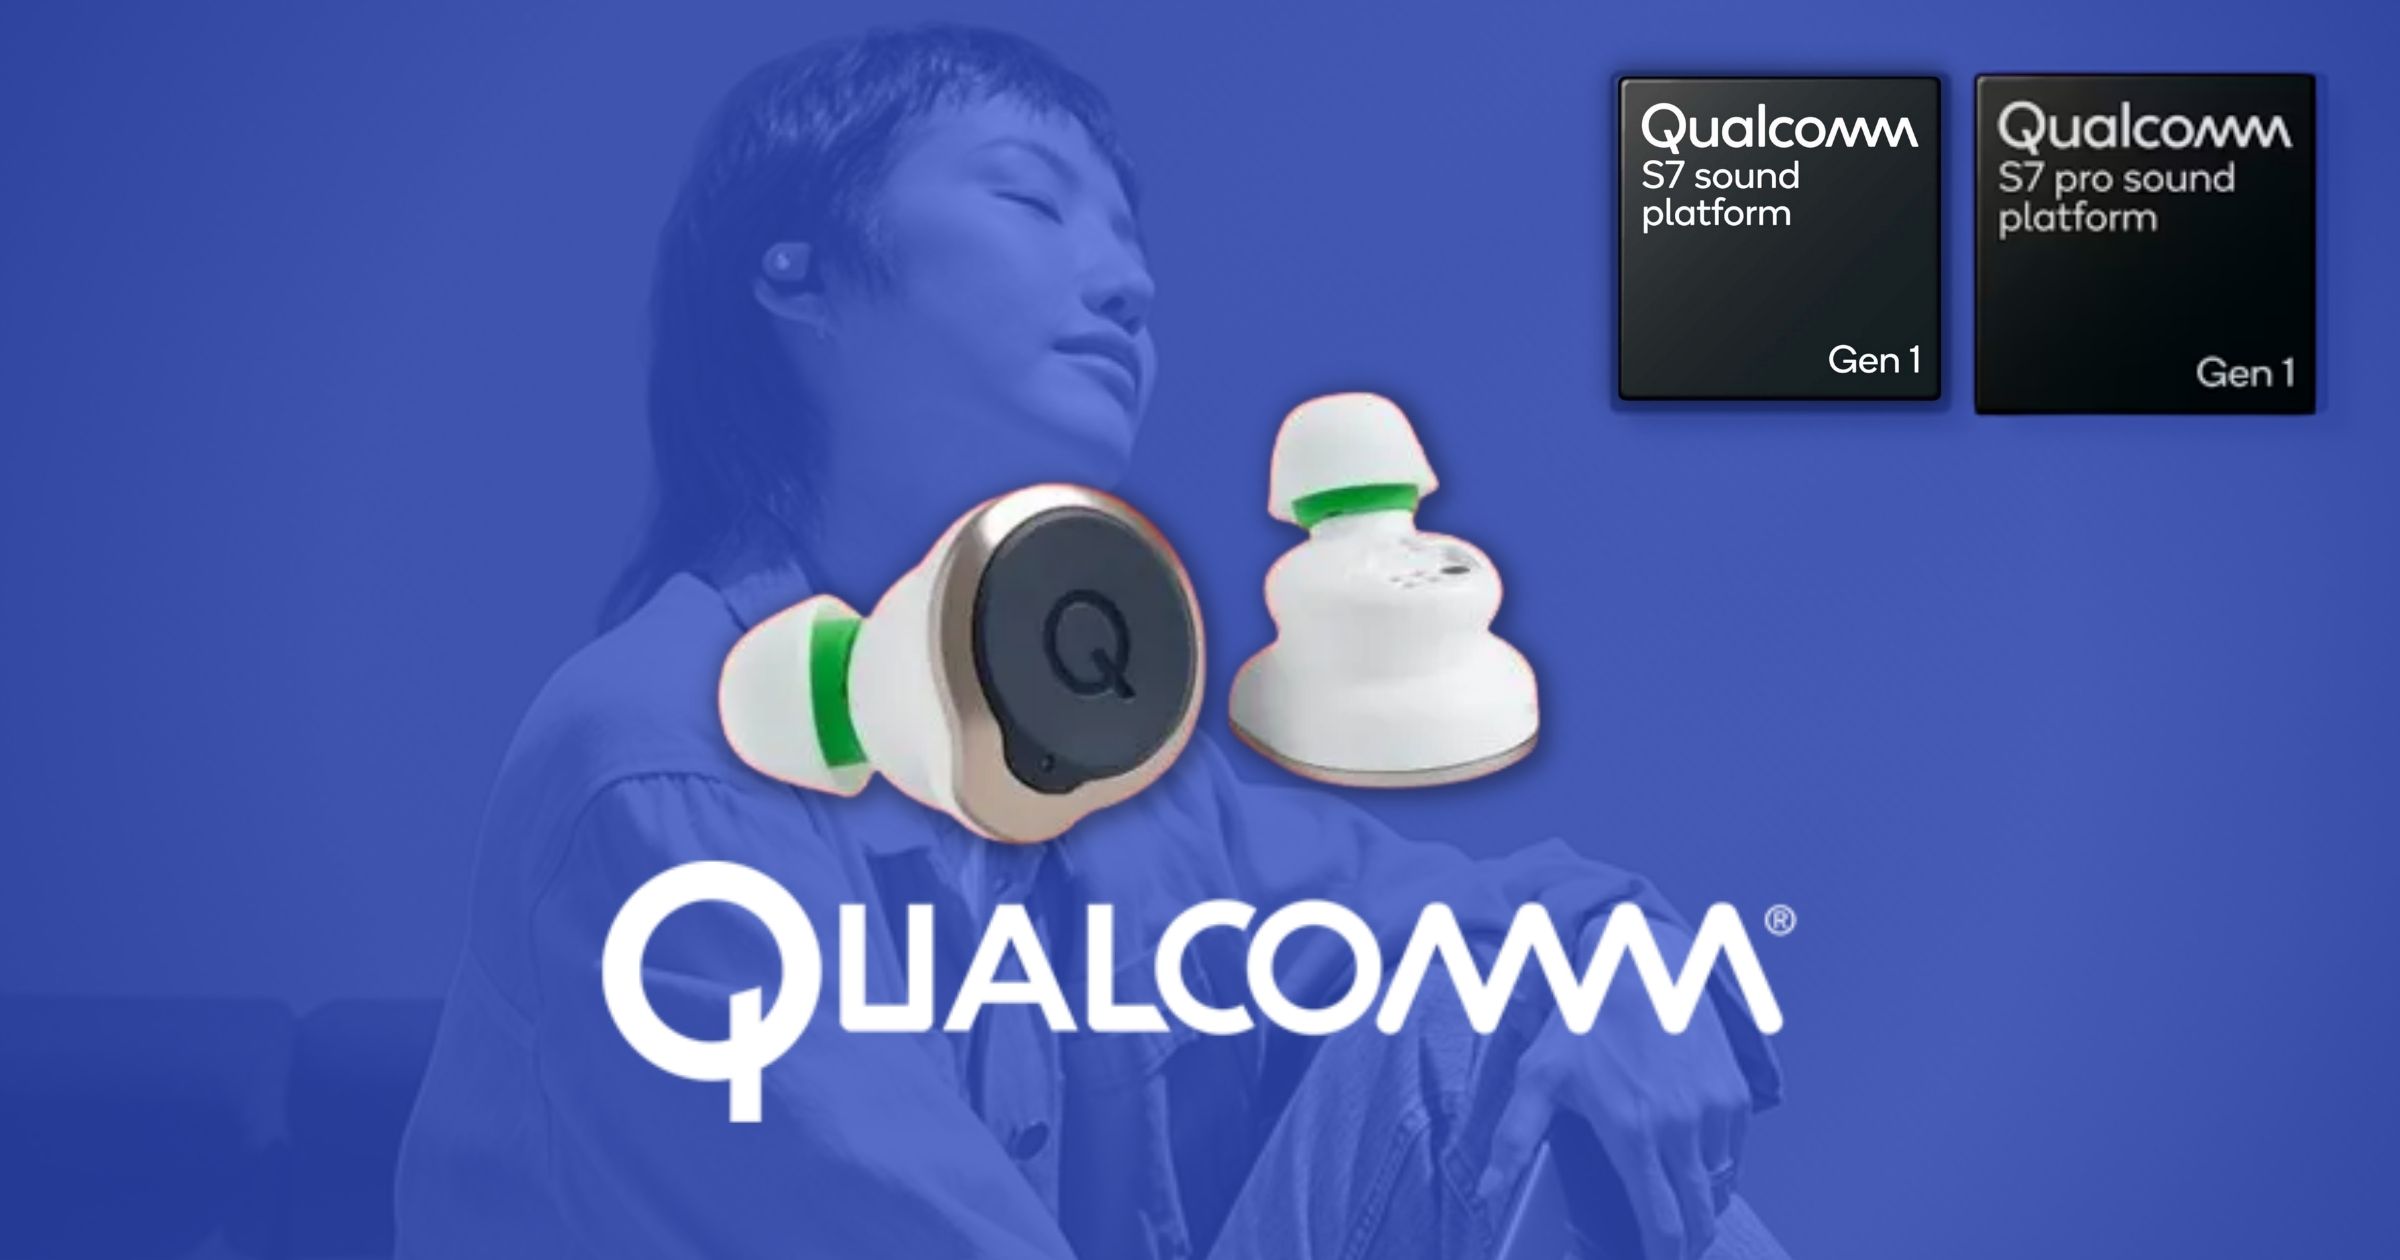 Featured image for “Qualcomm’s latest tech harnesses Wi-Fi to elevate audio experience for wireless earbuds and headphones”